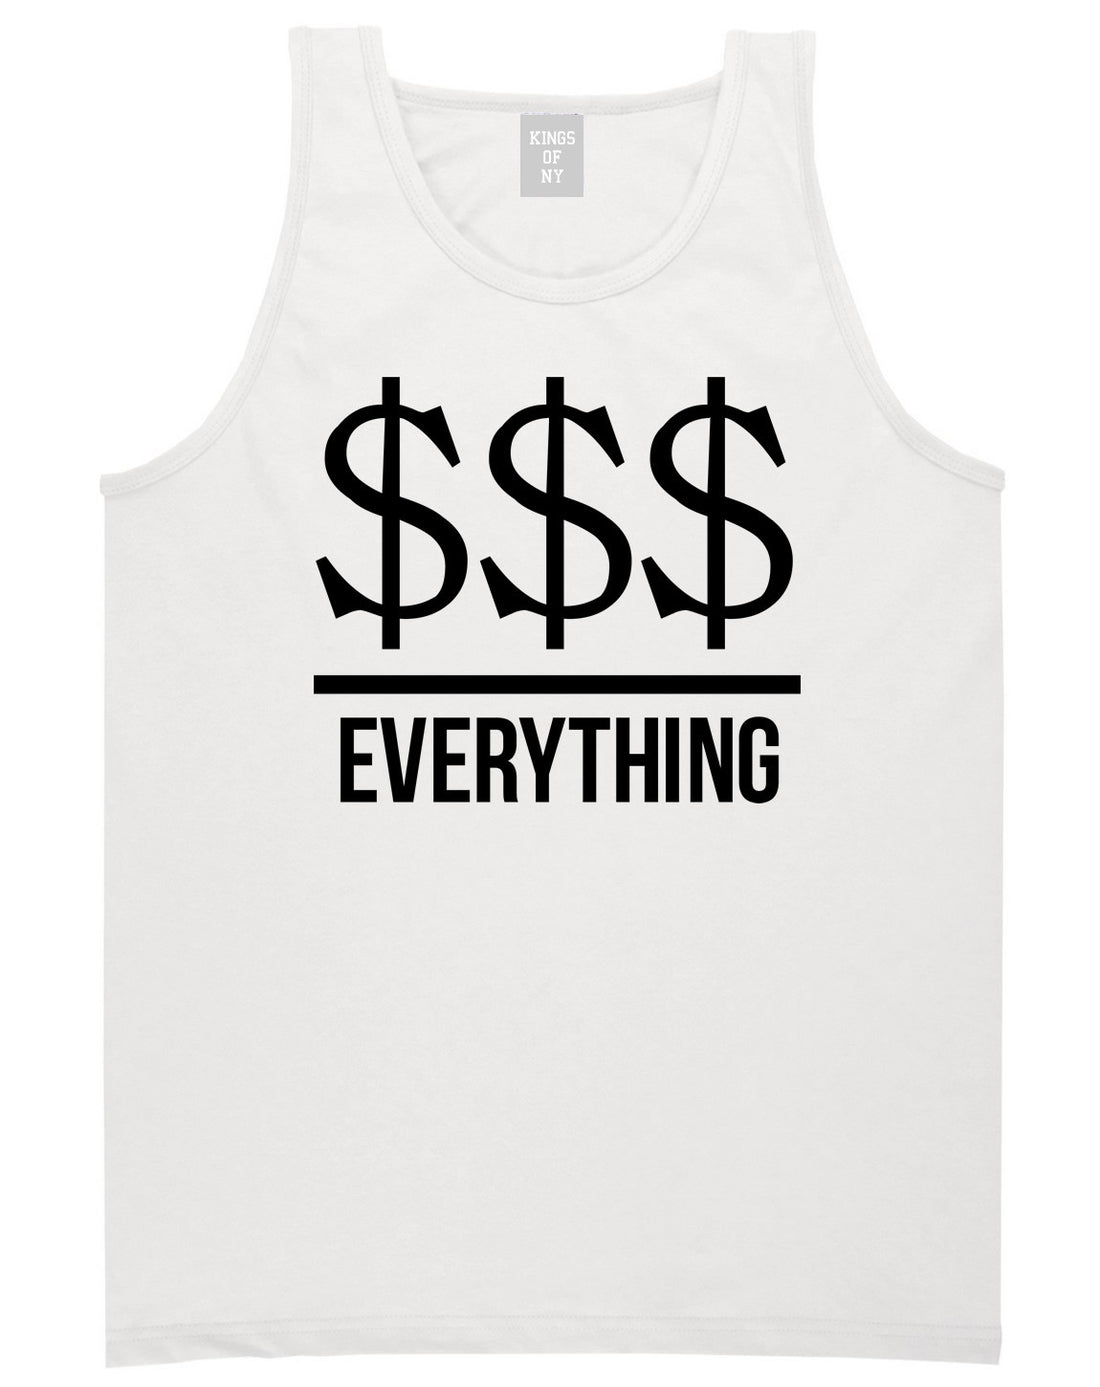 Kings Of NY Money Over Everything Tank Top in White